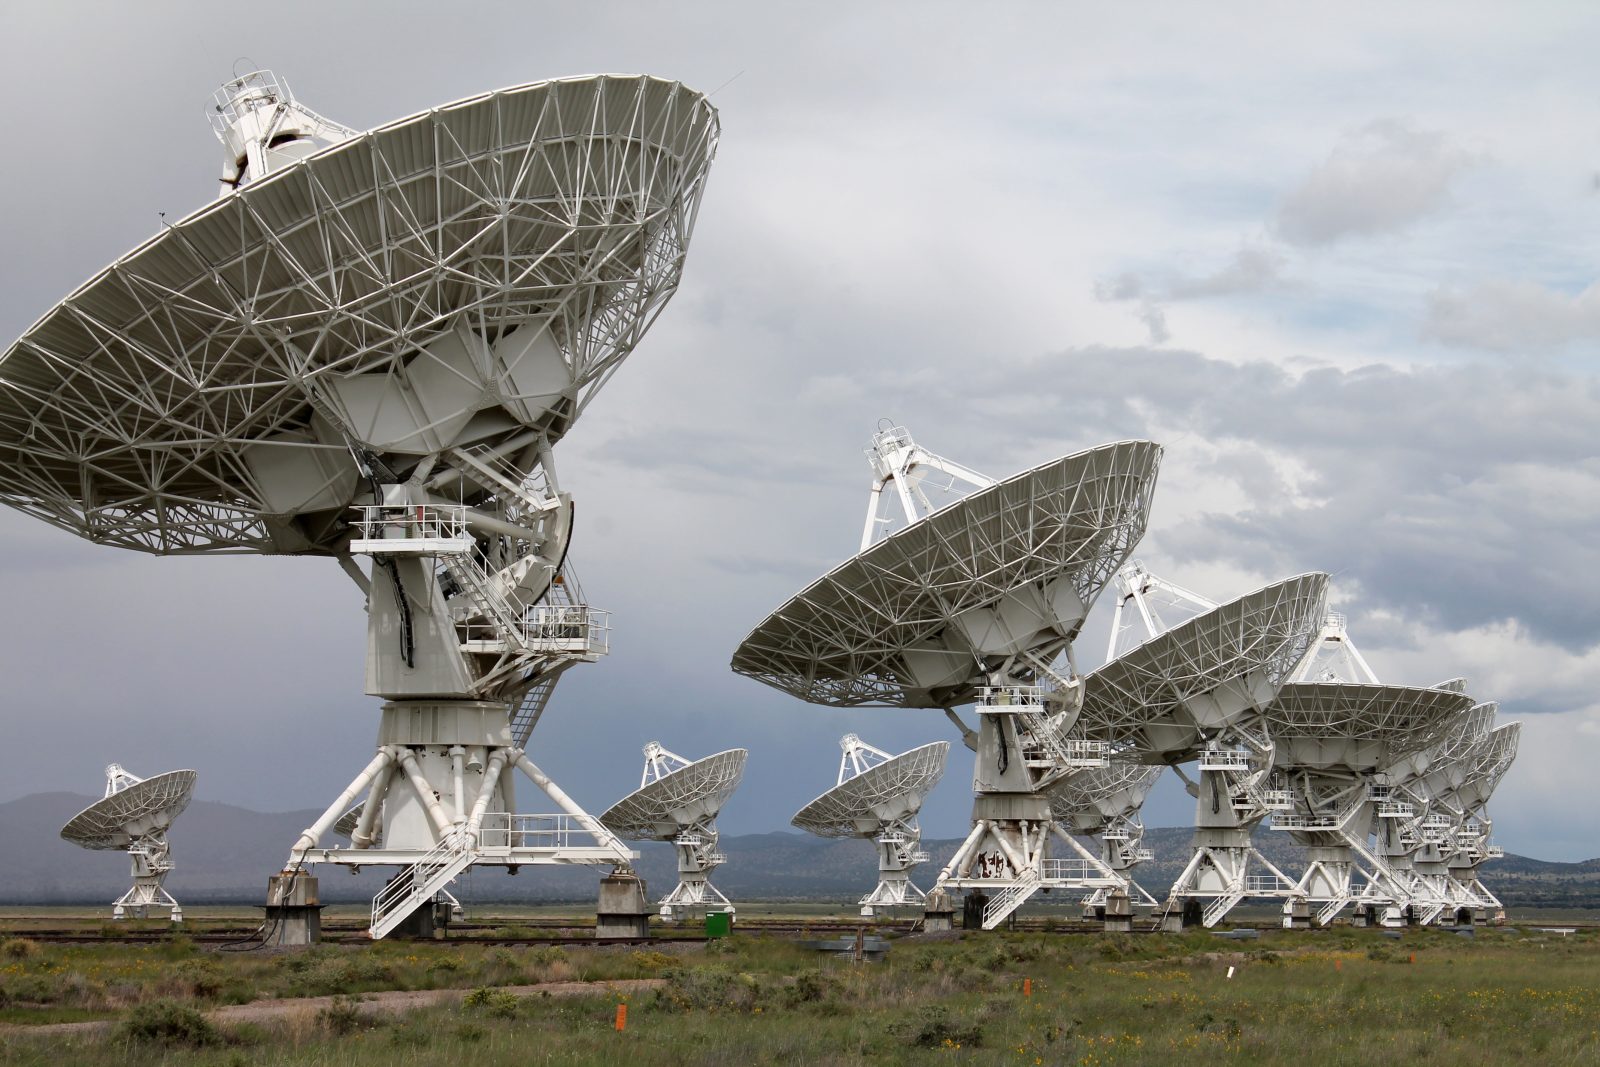 The Very Large Array (VLA) radio-astronomy antennas, in New Mexico, is one of the most impressive observatories in the world. The Sun was piercing through after a major storm during a public tour.